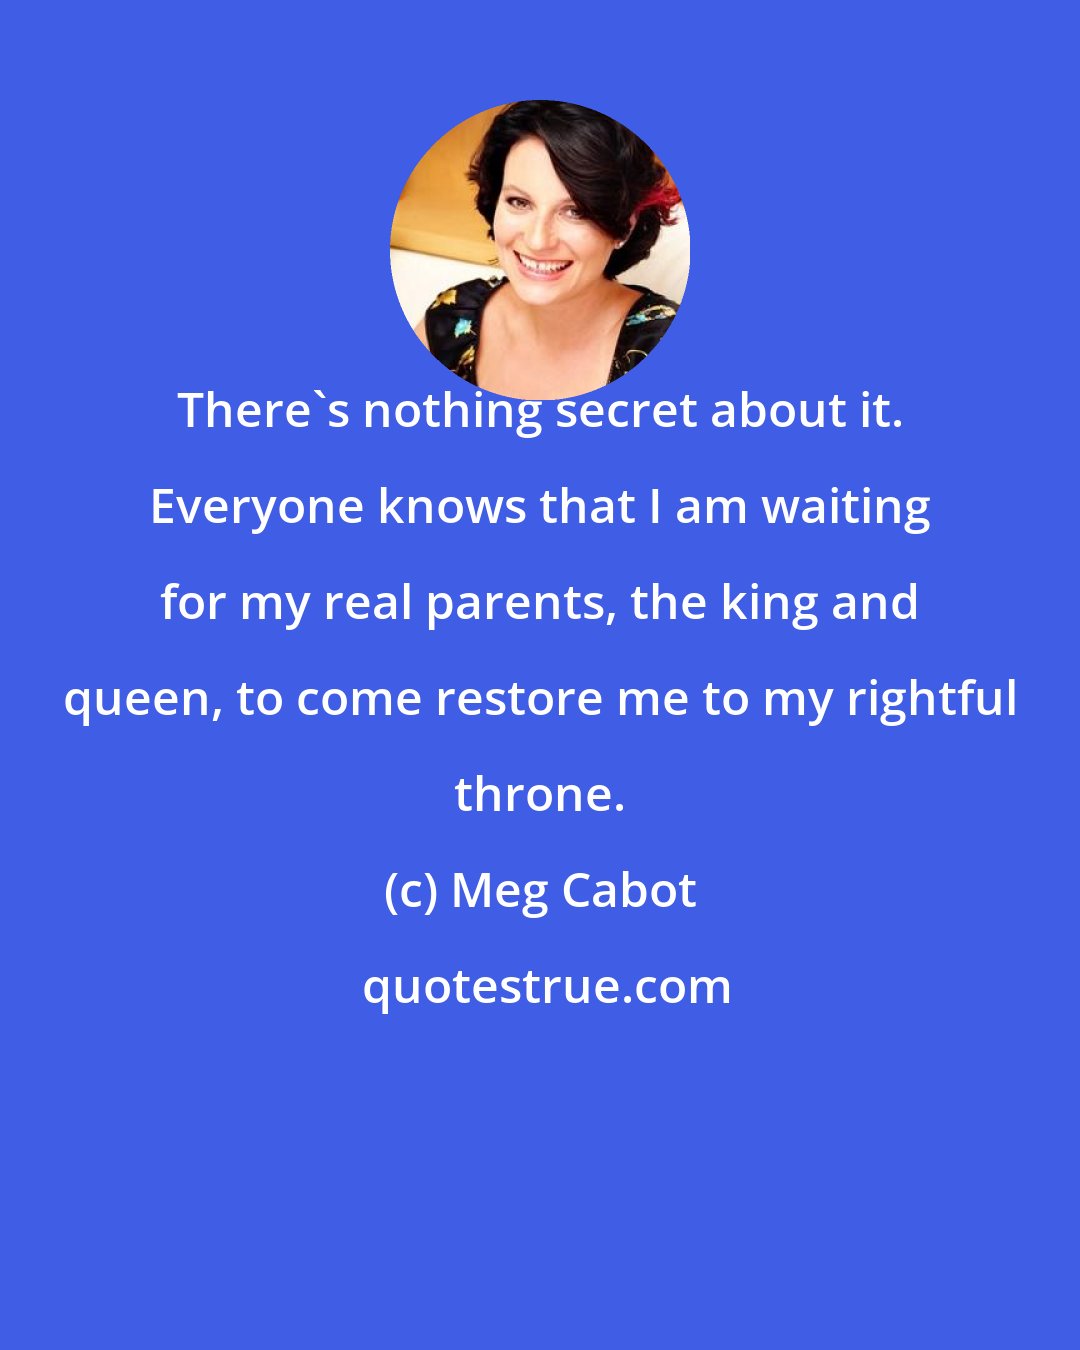 Meg Cabot: There's nothing secret about it. Everyone knows that I am waiting for my real parents, the king and queen, to come restore me to my rightful throne.